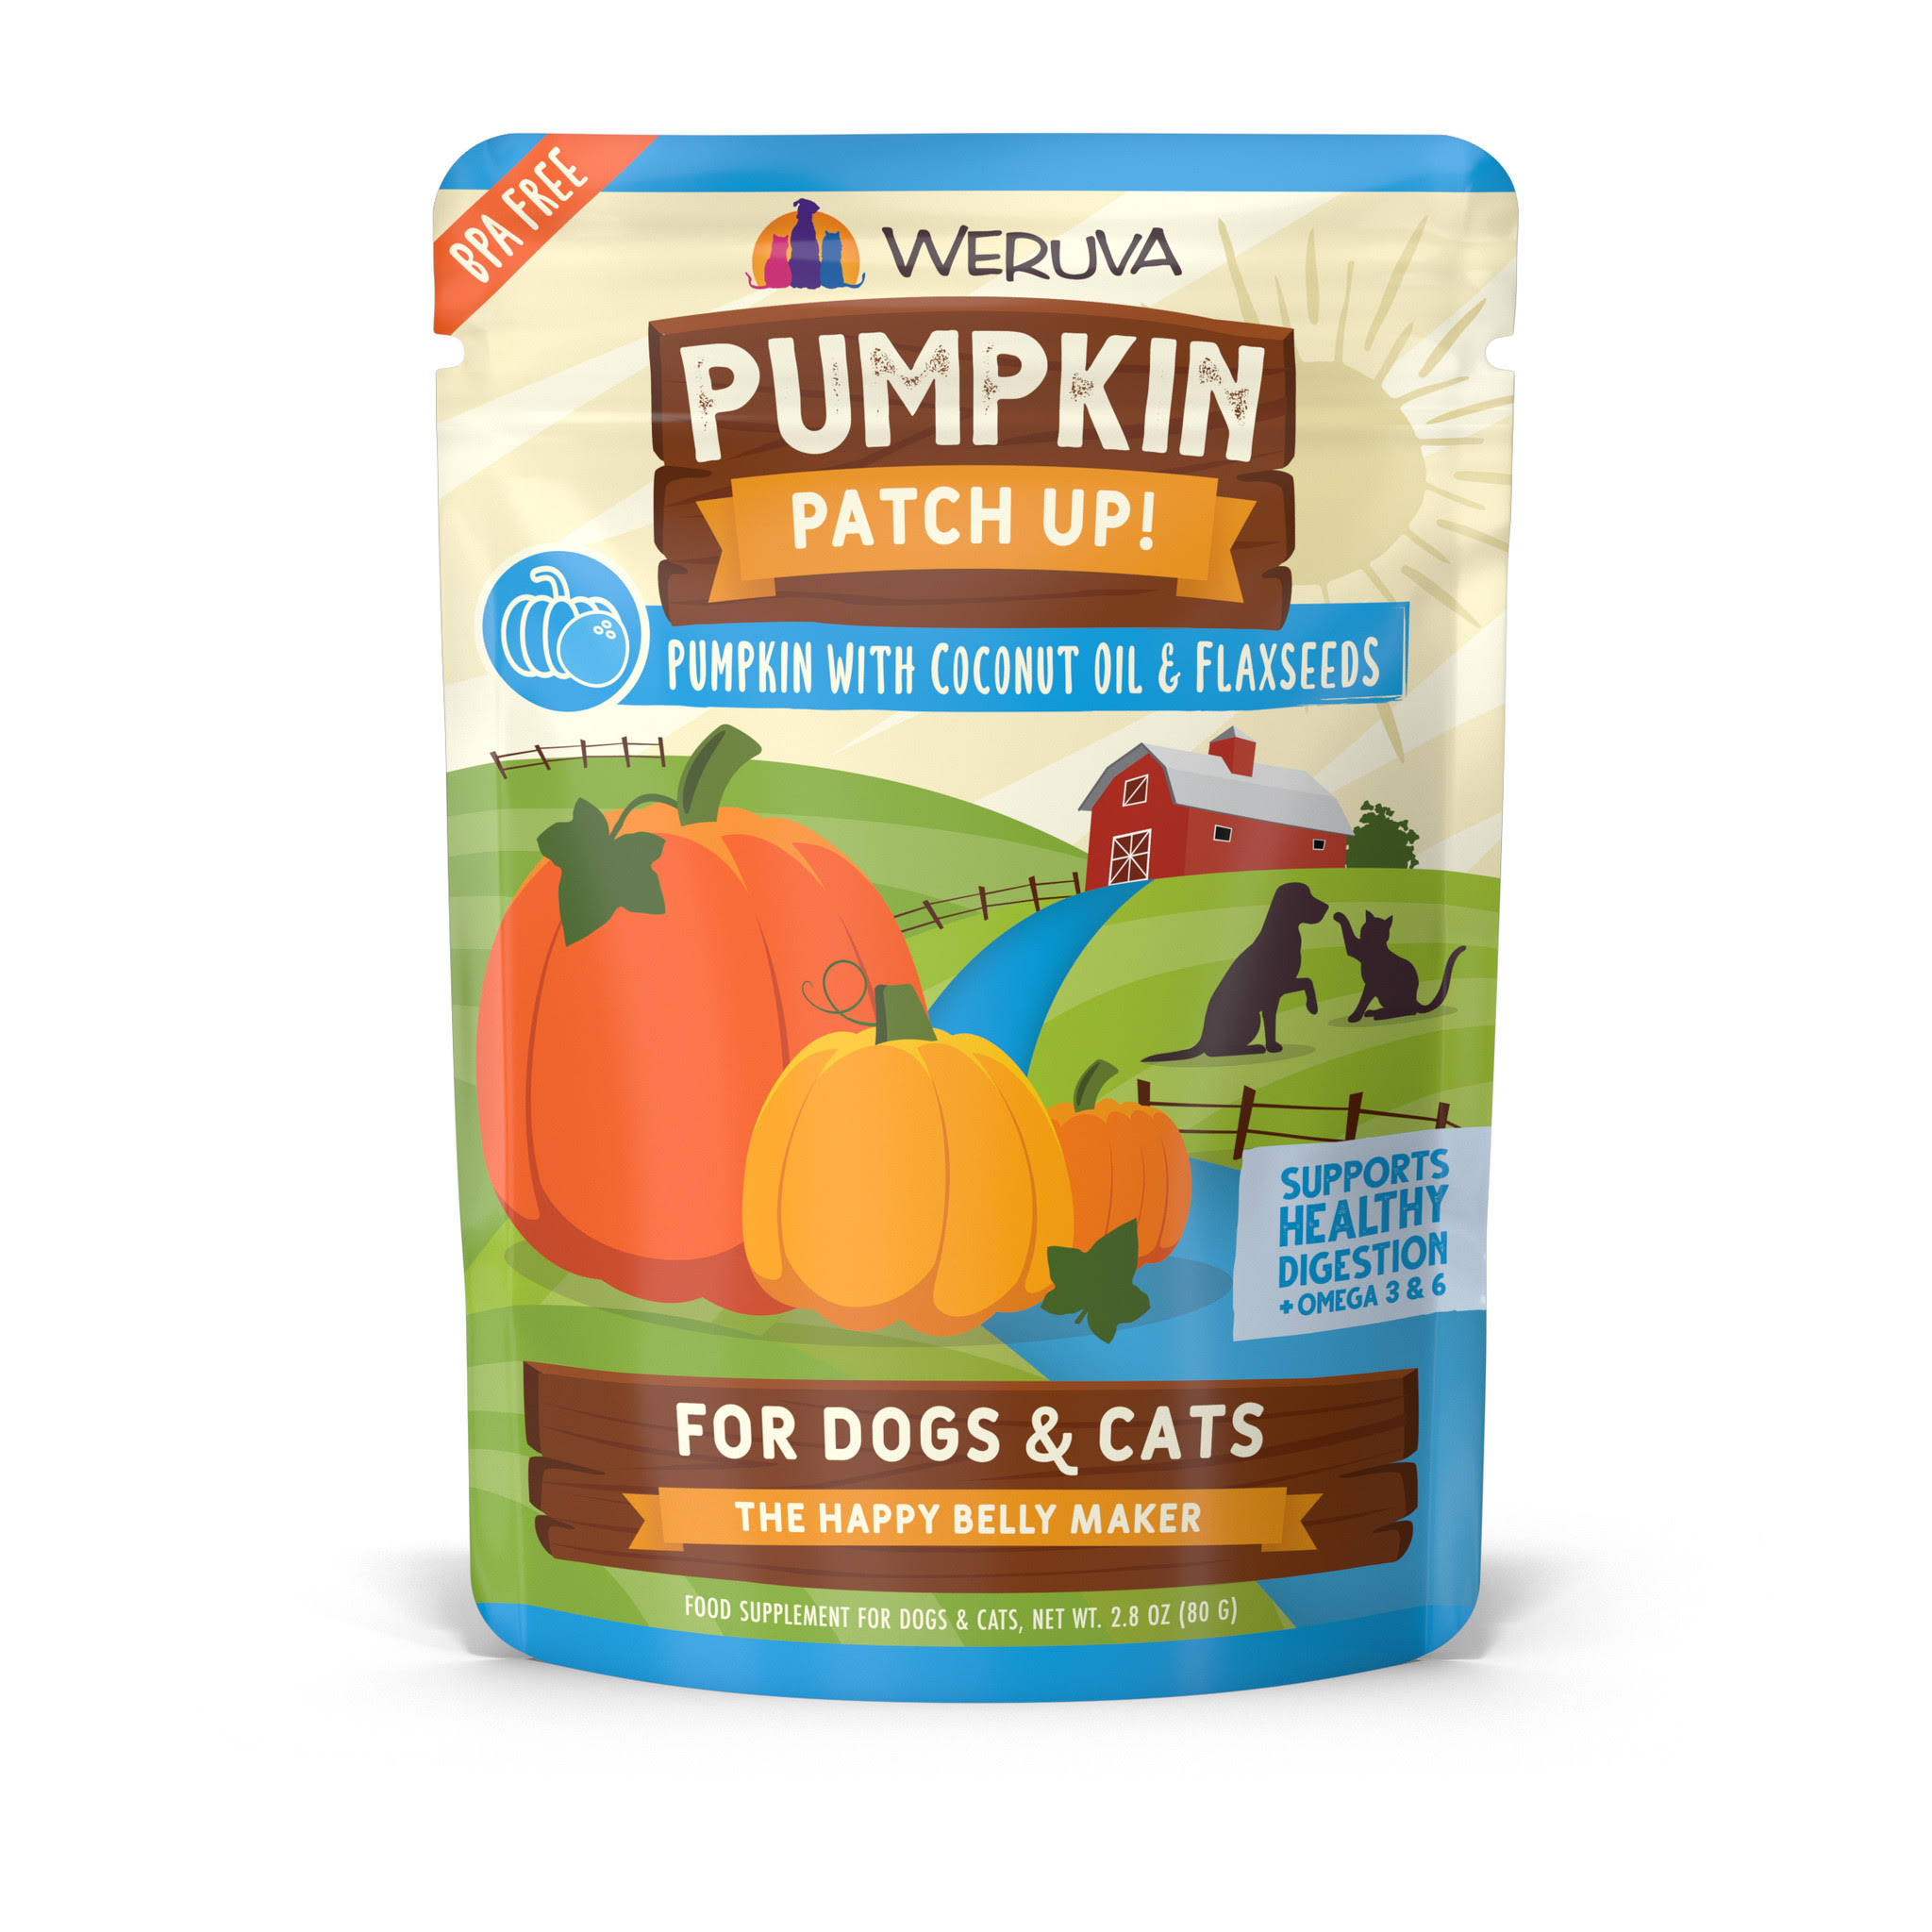 Pumpkin Patch Up - Pumpkin with Coconut Oil & Flaxseeds, 1.05 oz